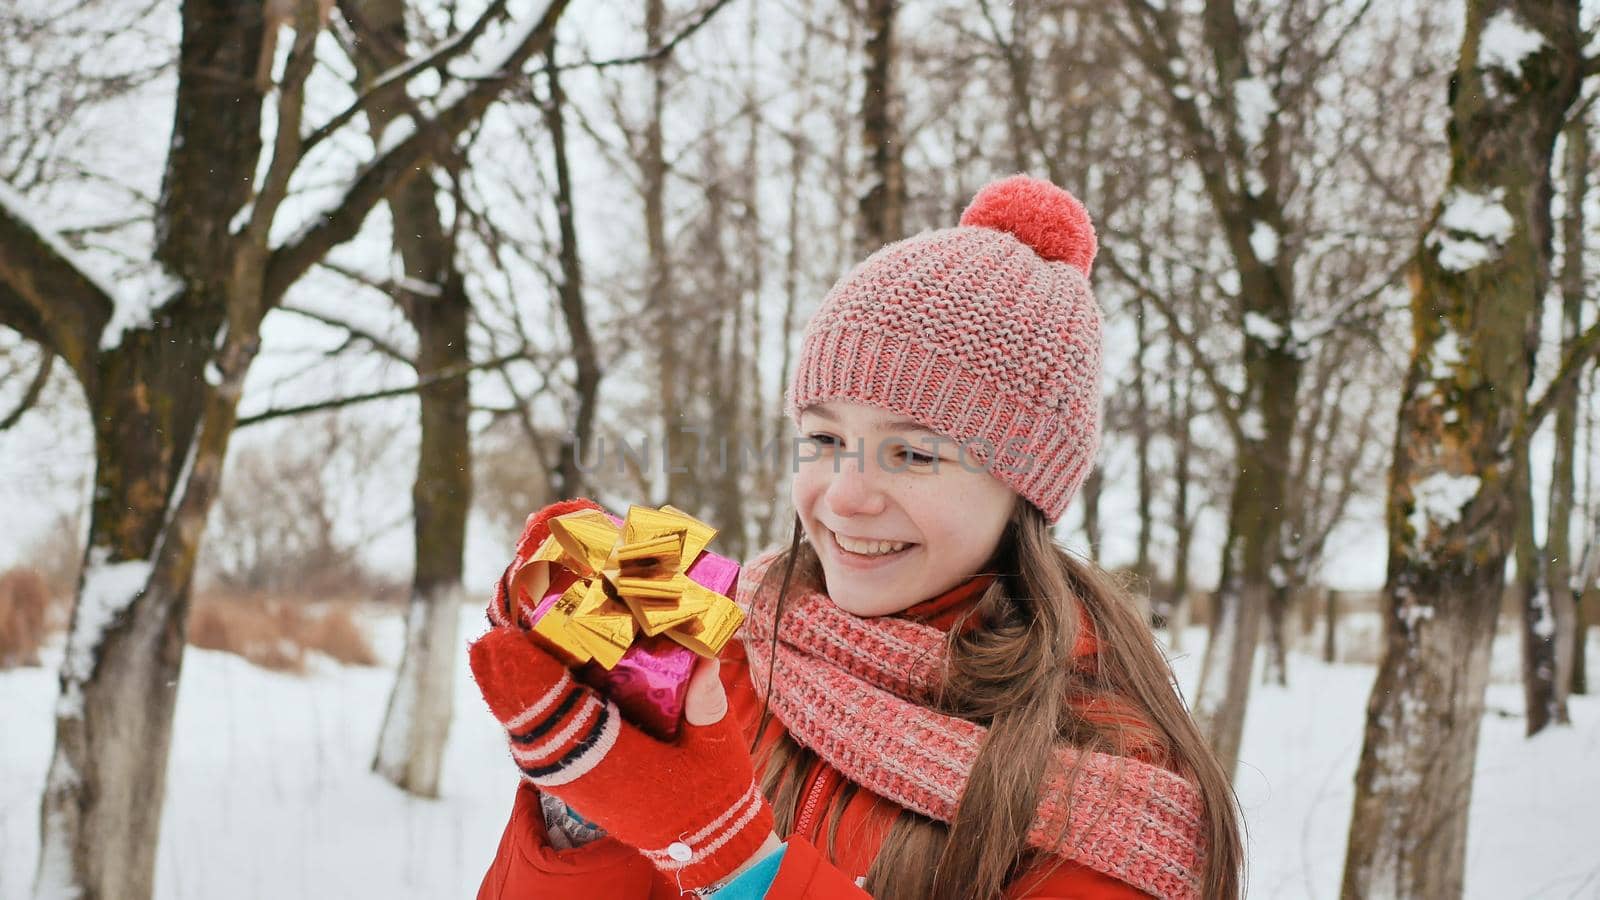 A beautiful young schoolgirl standing in a snowy forest in the winter takes a joyful gift from the hands of a friend